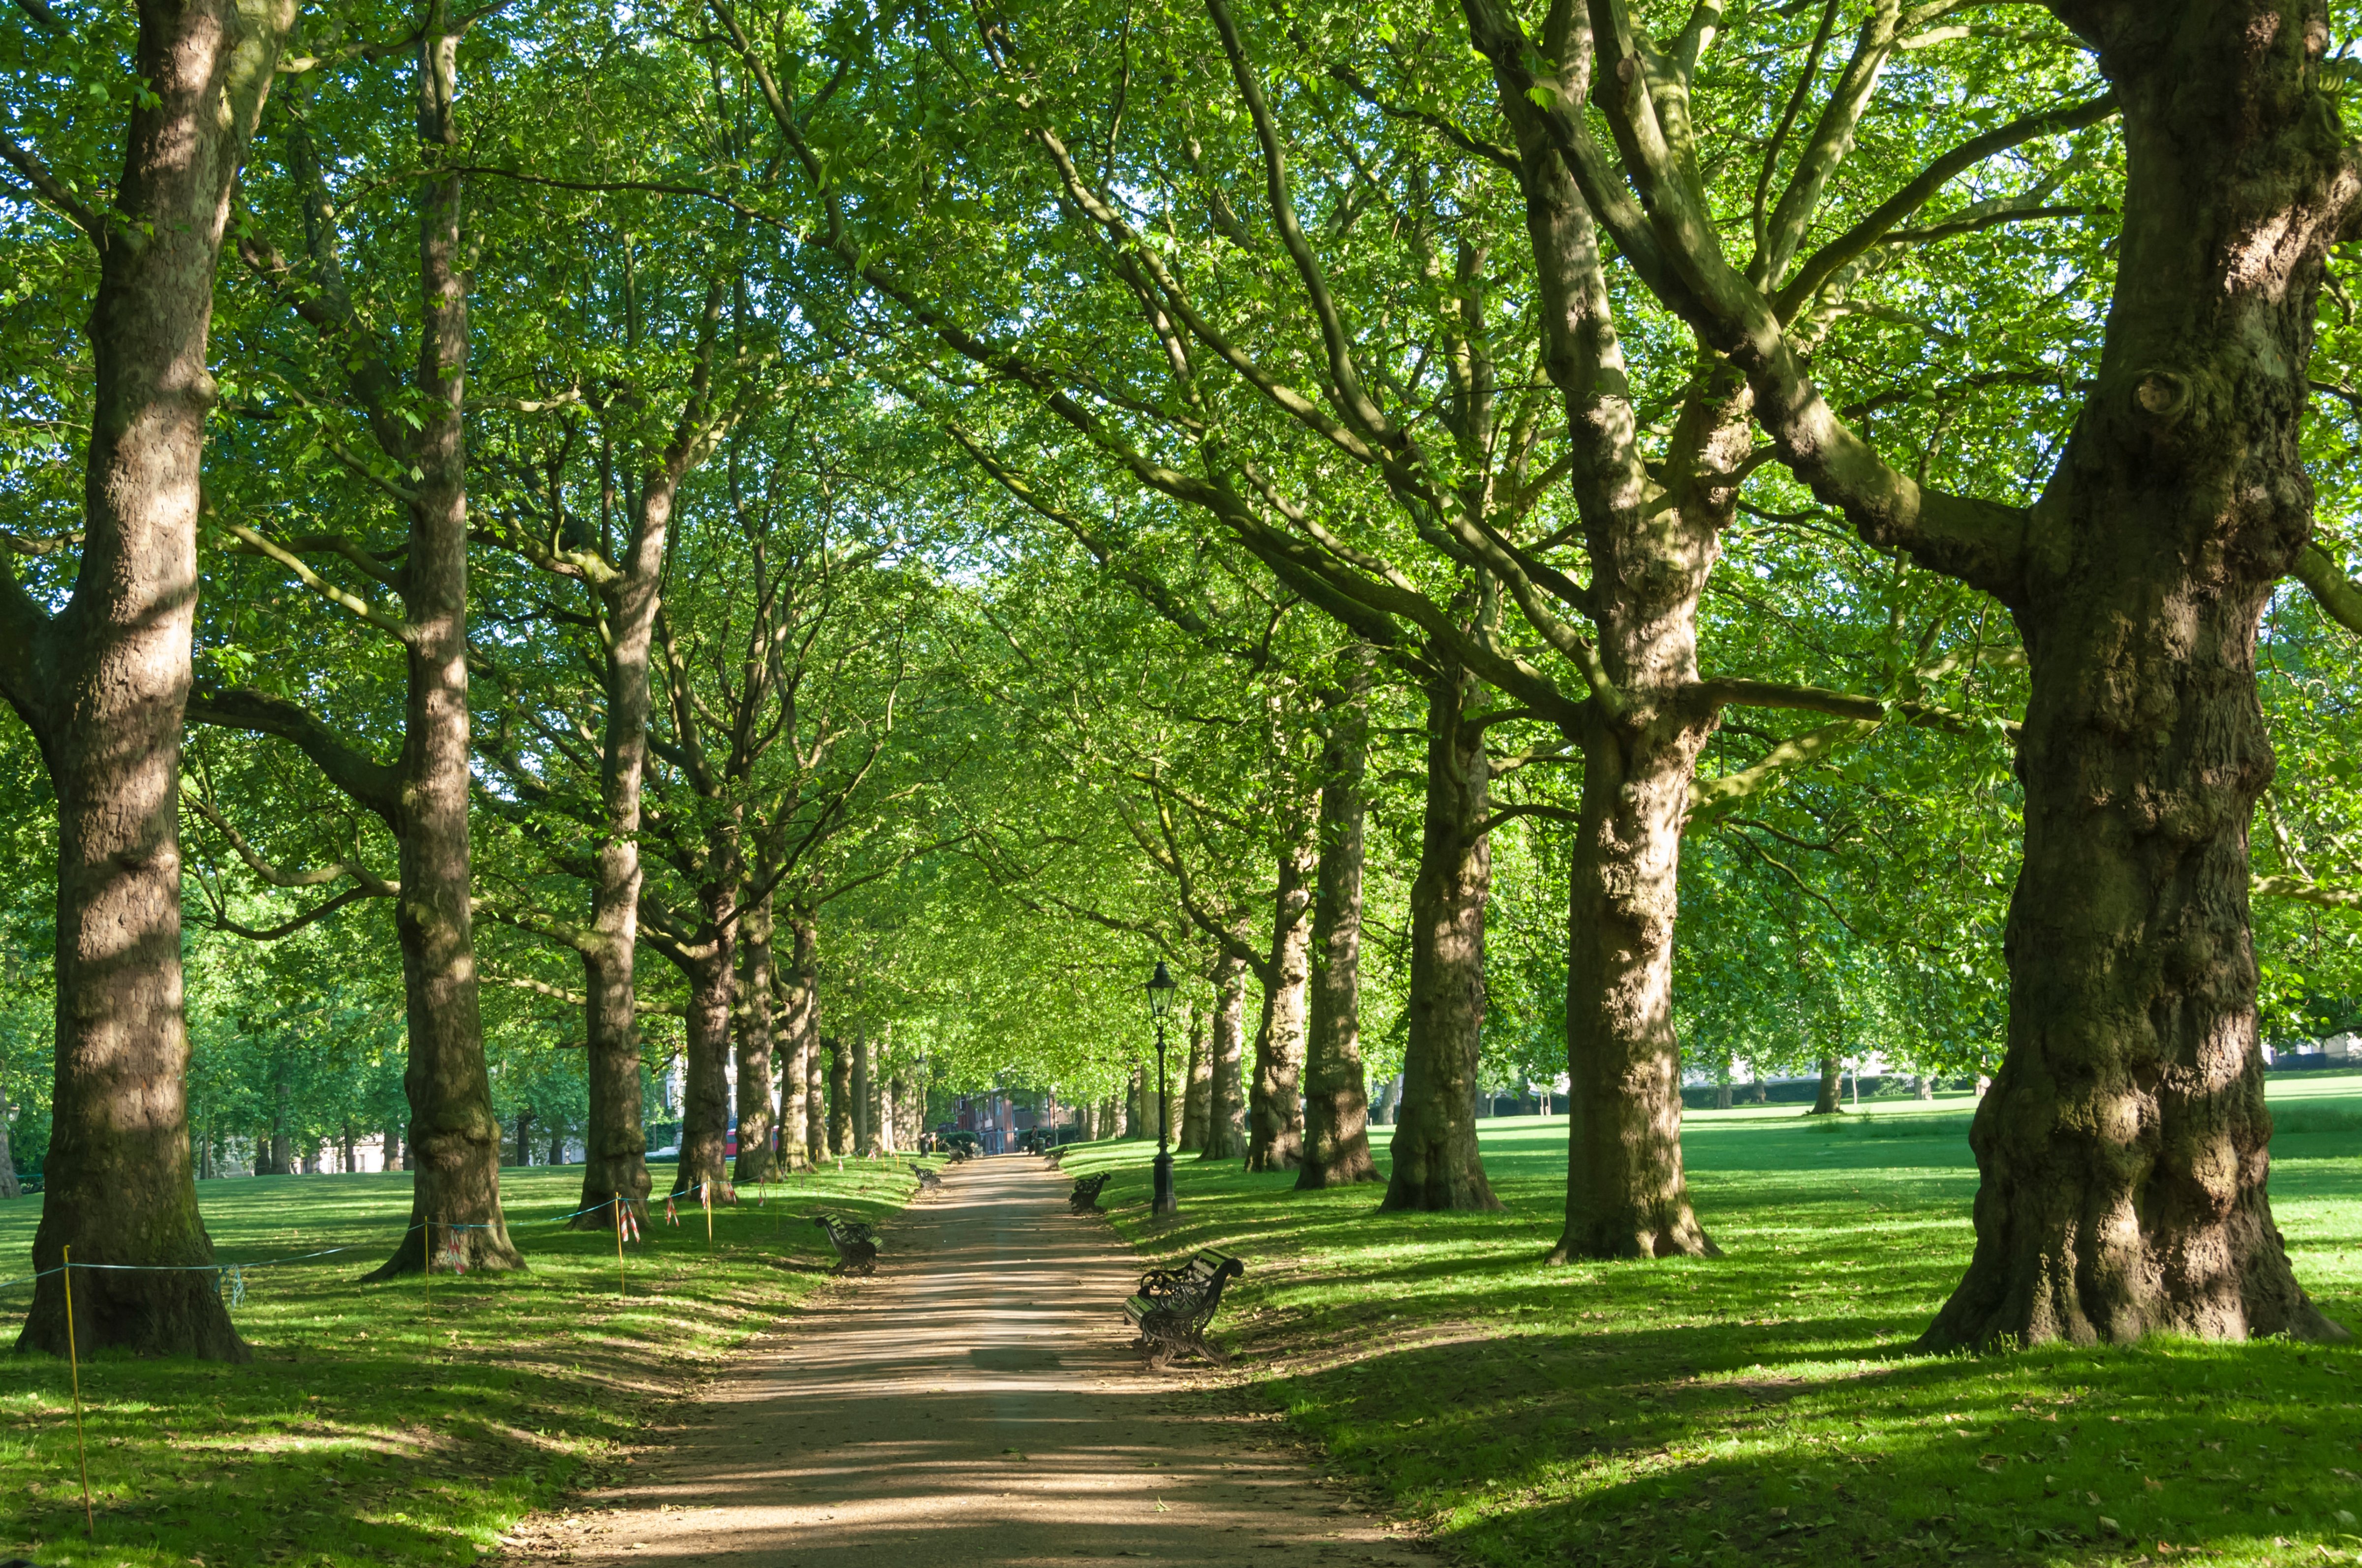 Avenue of trees in Green Park, London, England, United Kingdom, Europe